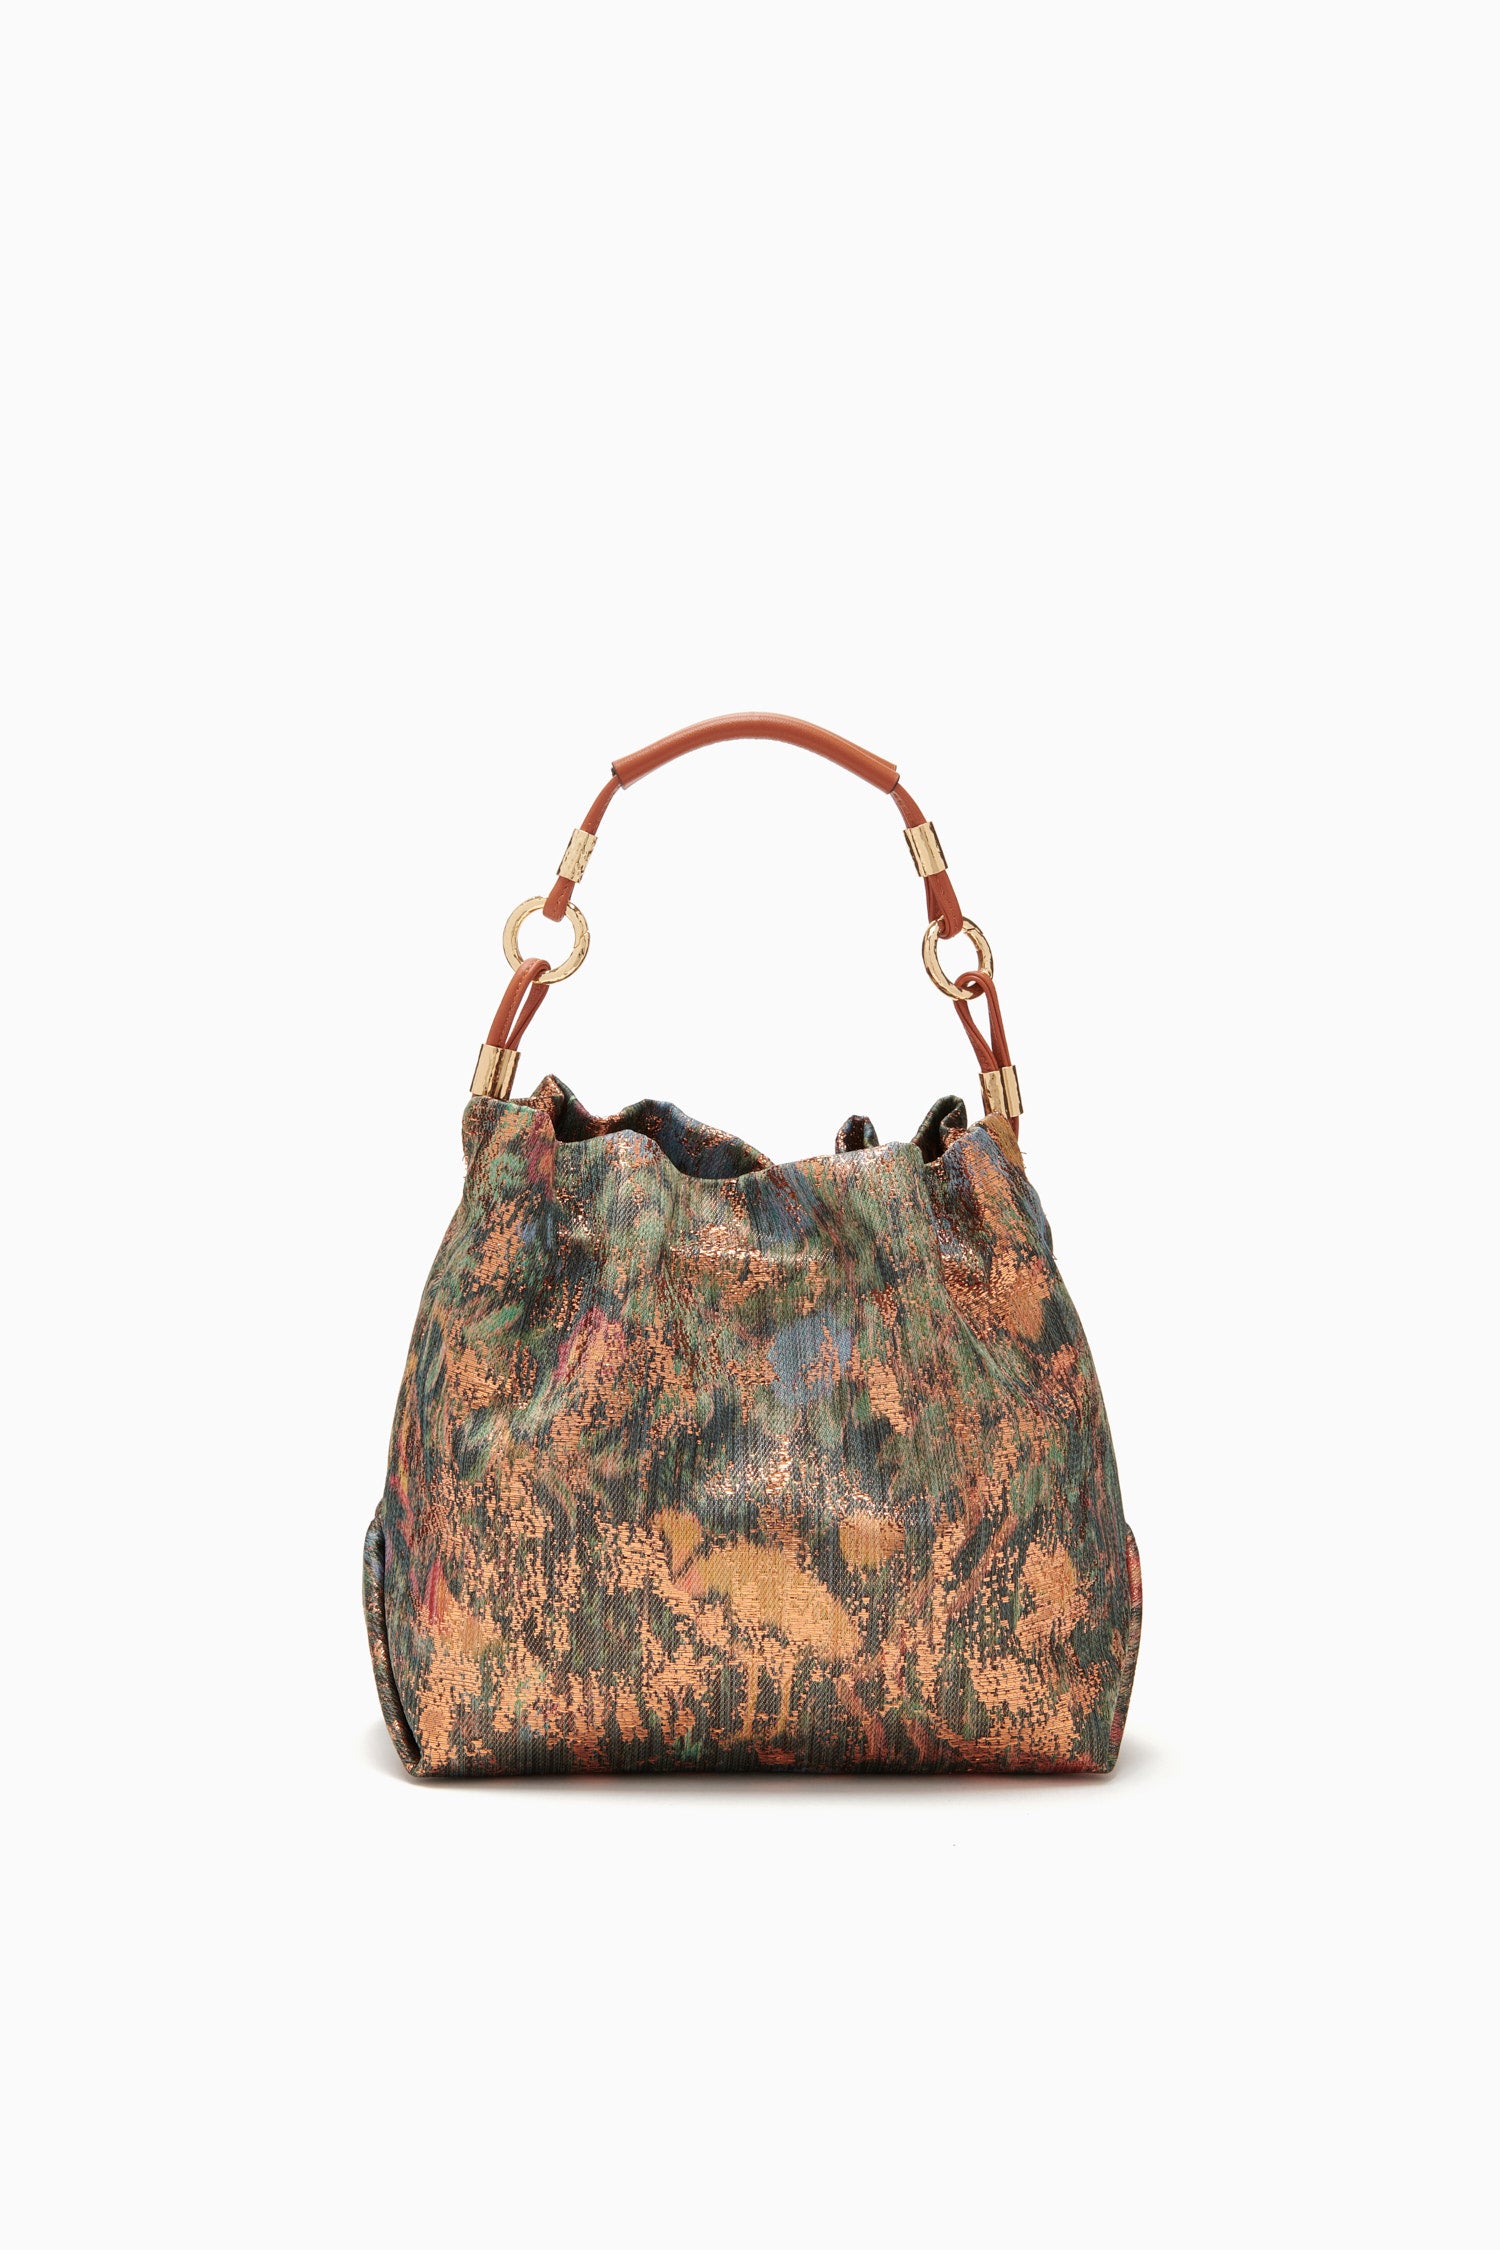 Alma full of Color by New Vintage Handbags